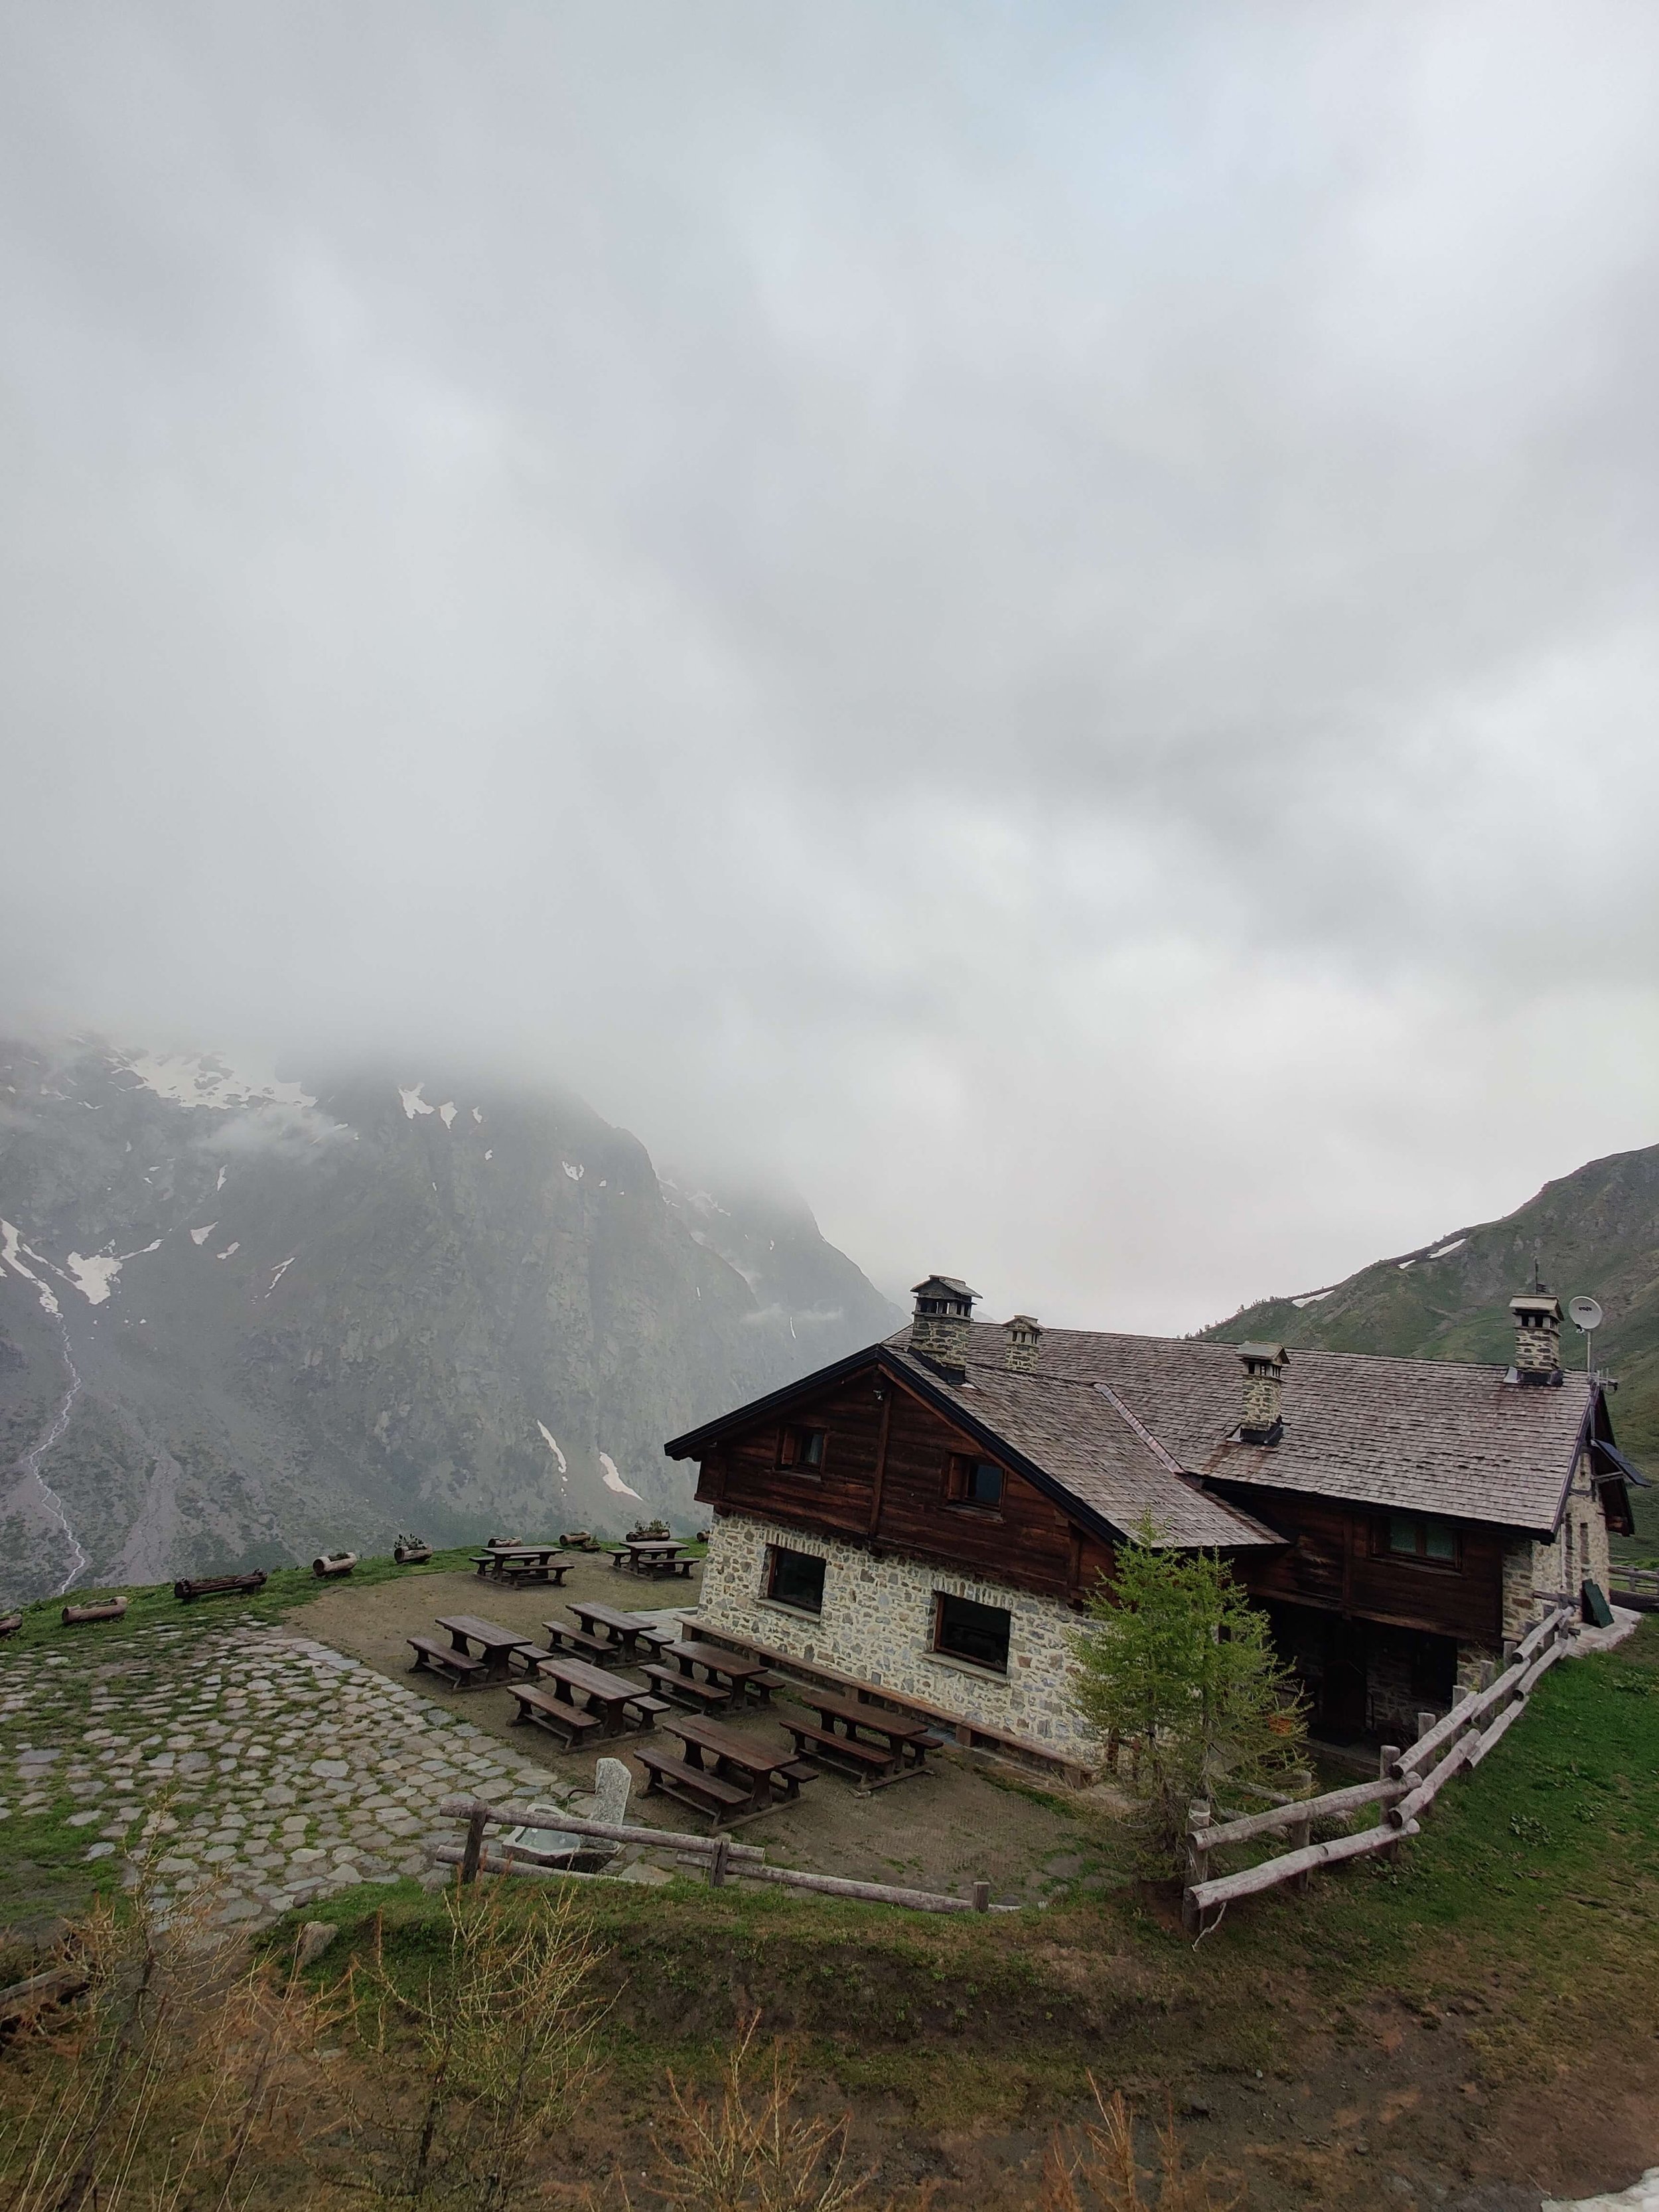 Rifugio Bonatti - they were closed but i saw a couple of chefs in the kitchen whipping up a storm_31 May 2022_resized.jpg